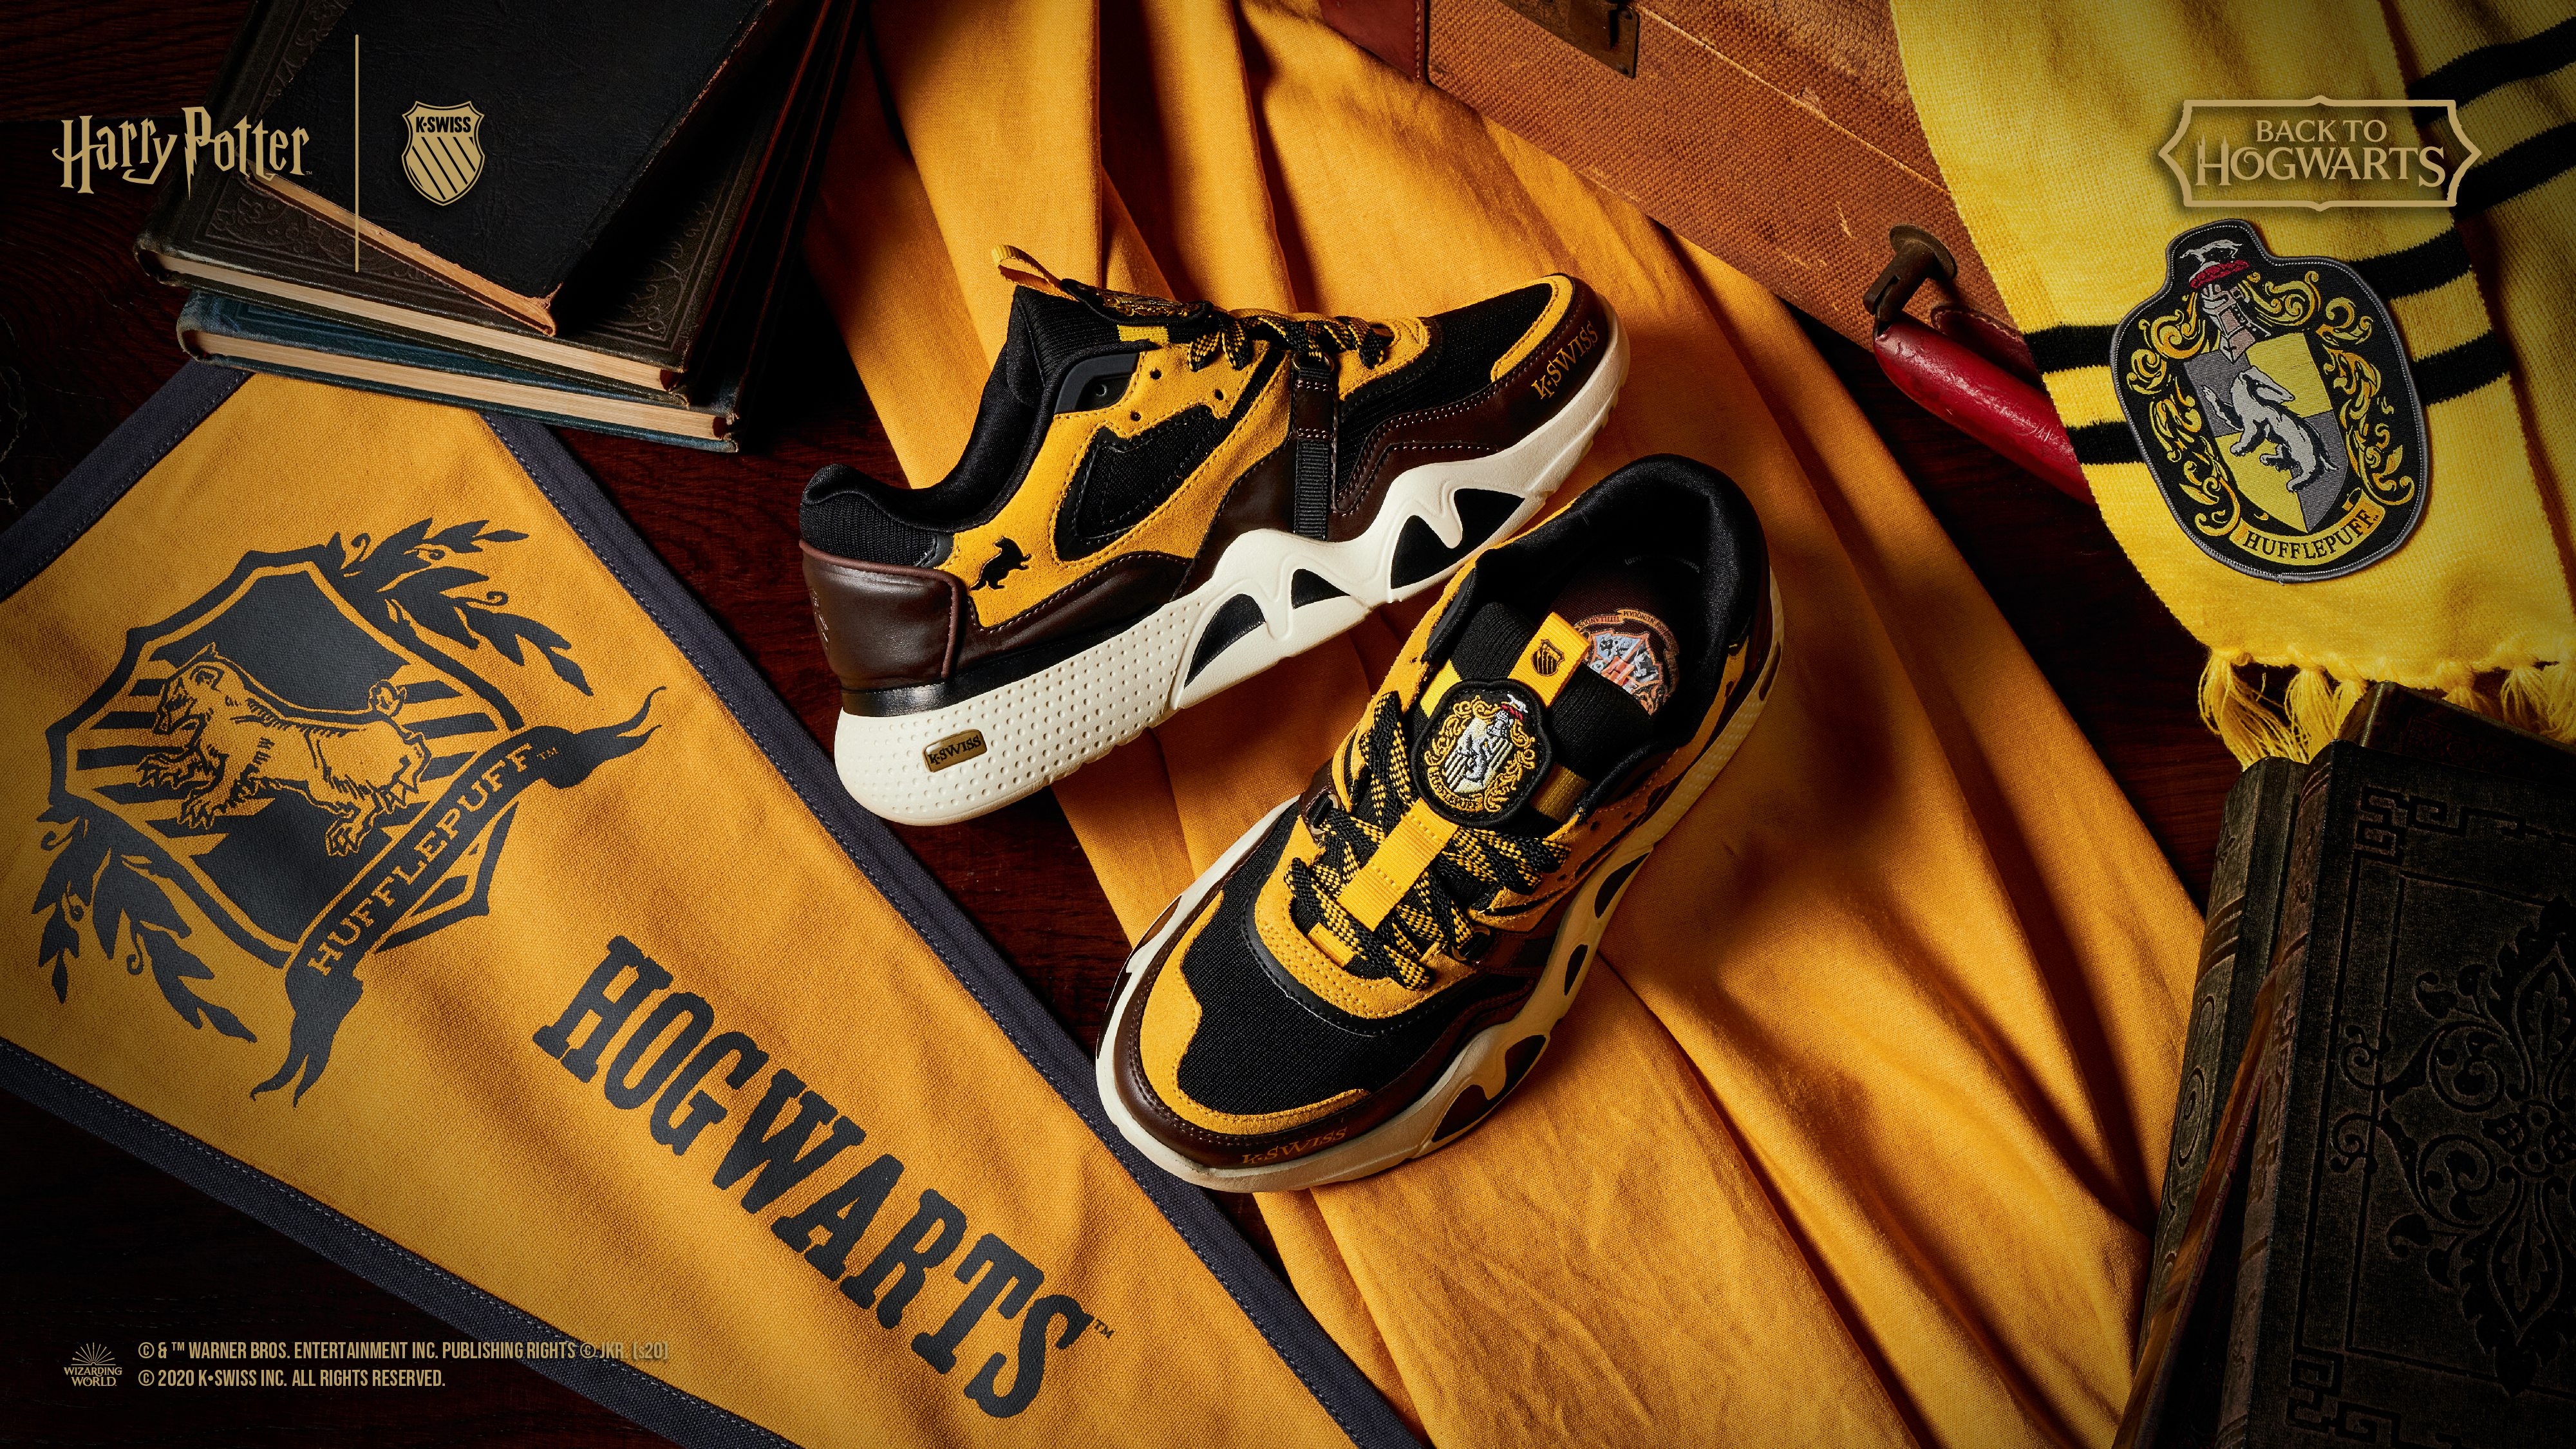 The new Harry Potter x K-Swiss shoes – from 31st July